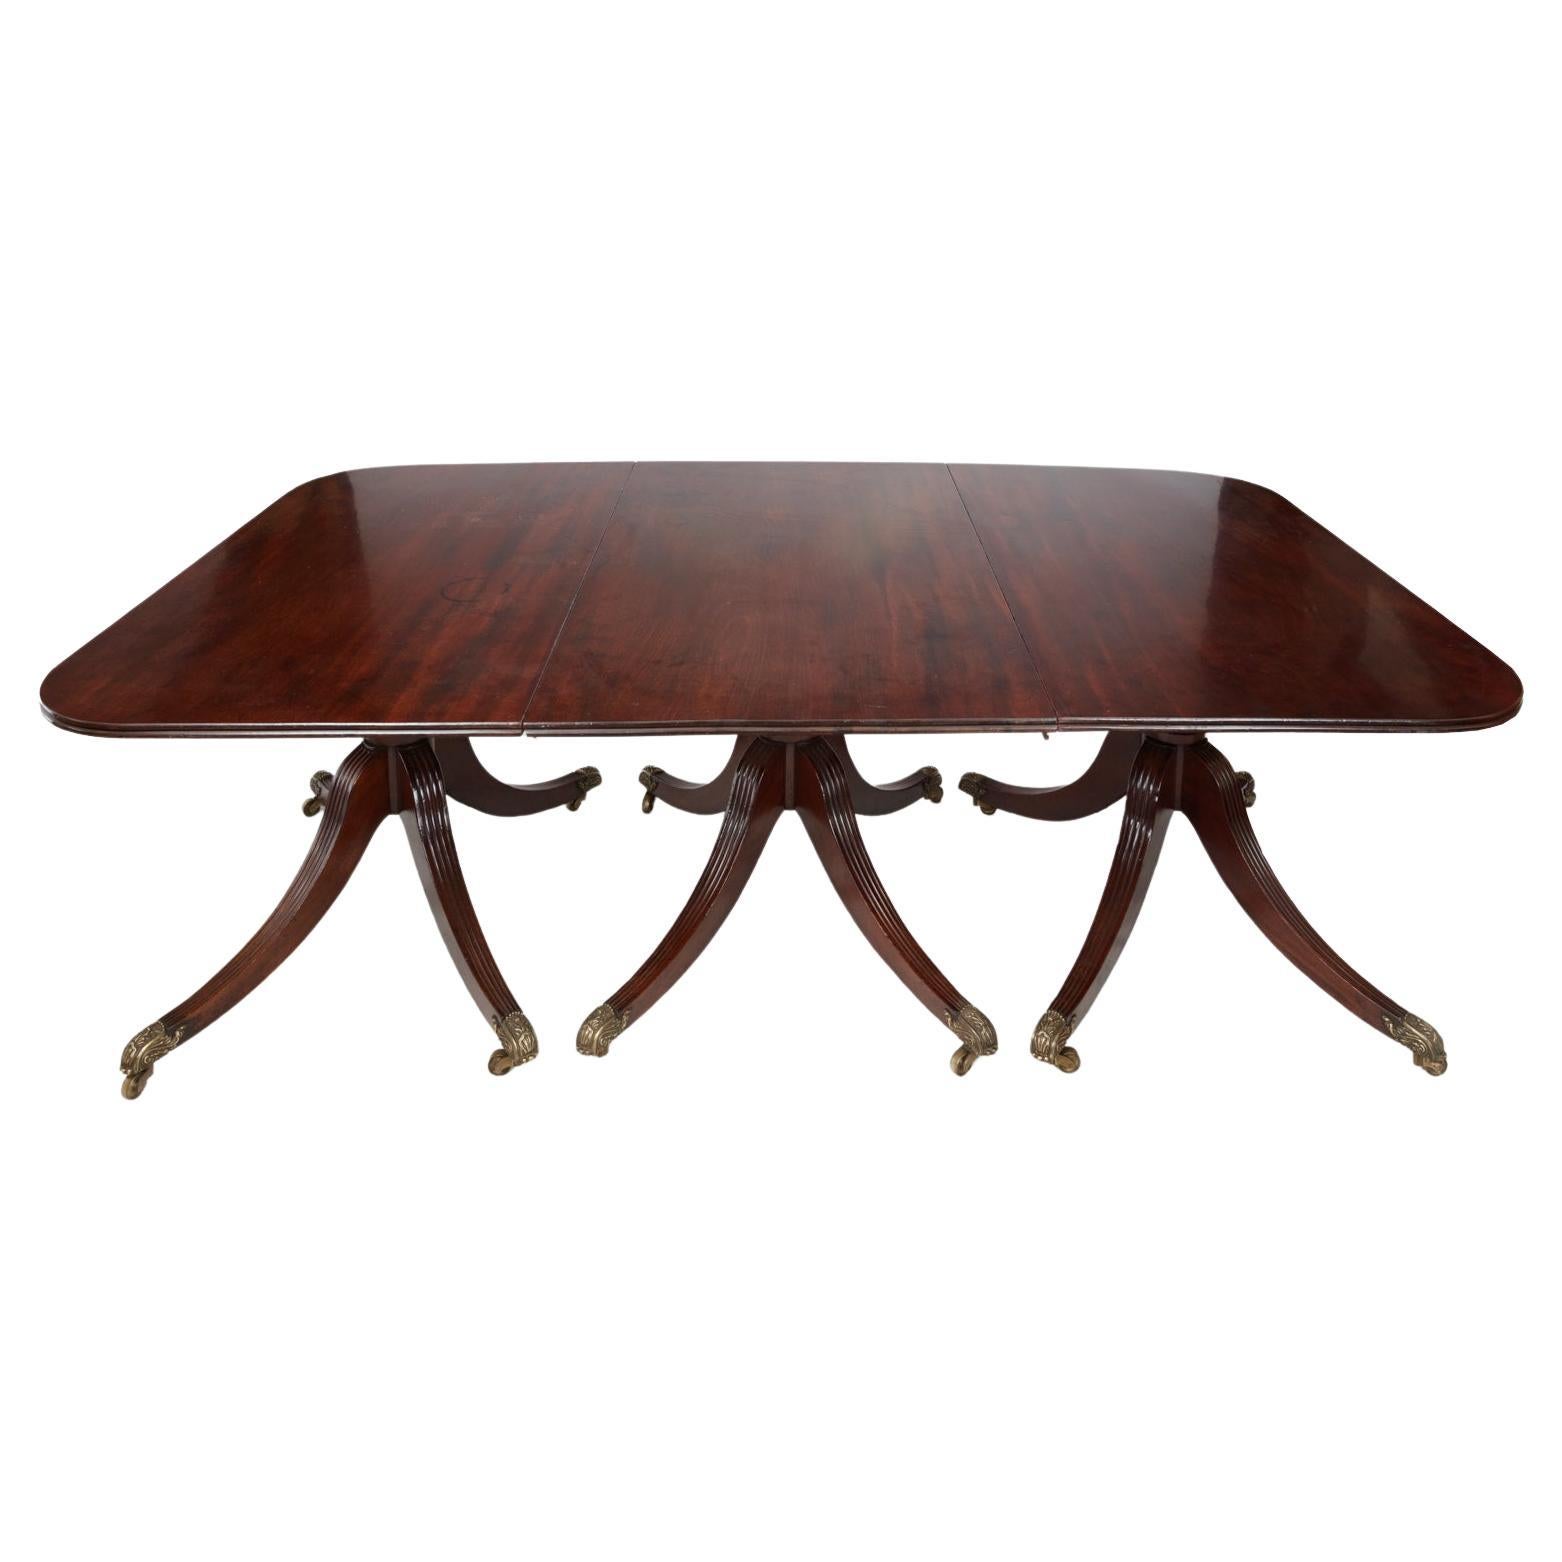 Early 19th Century English Regency Dining Table